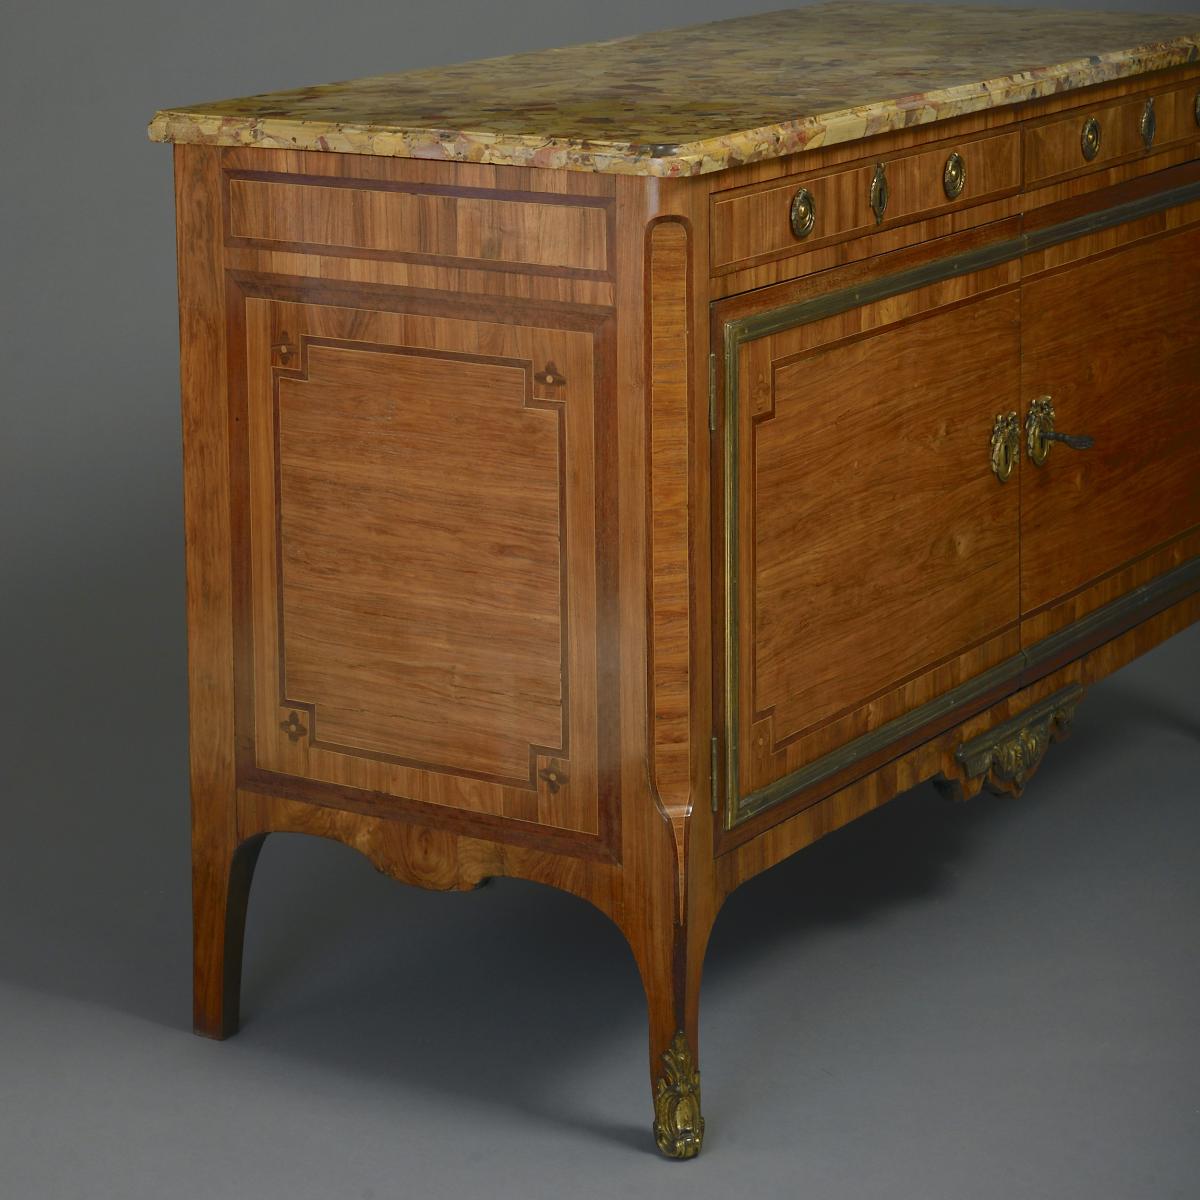 KINGWOOD AND AMARANTH COMMODE BY CLAUDE-CHARLES SAUNIER